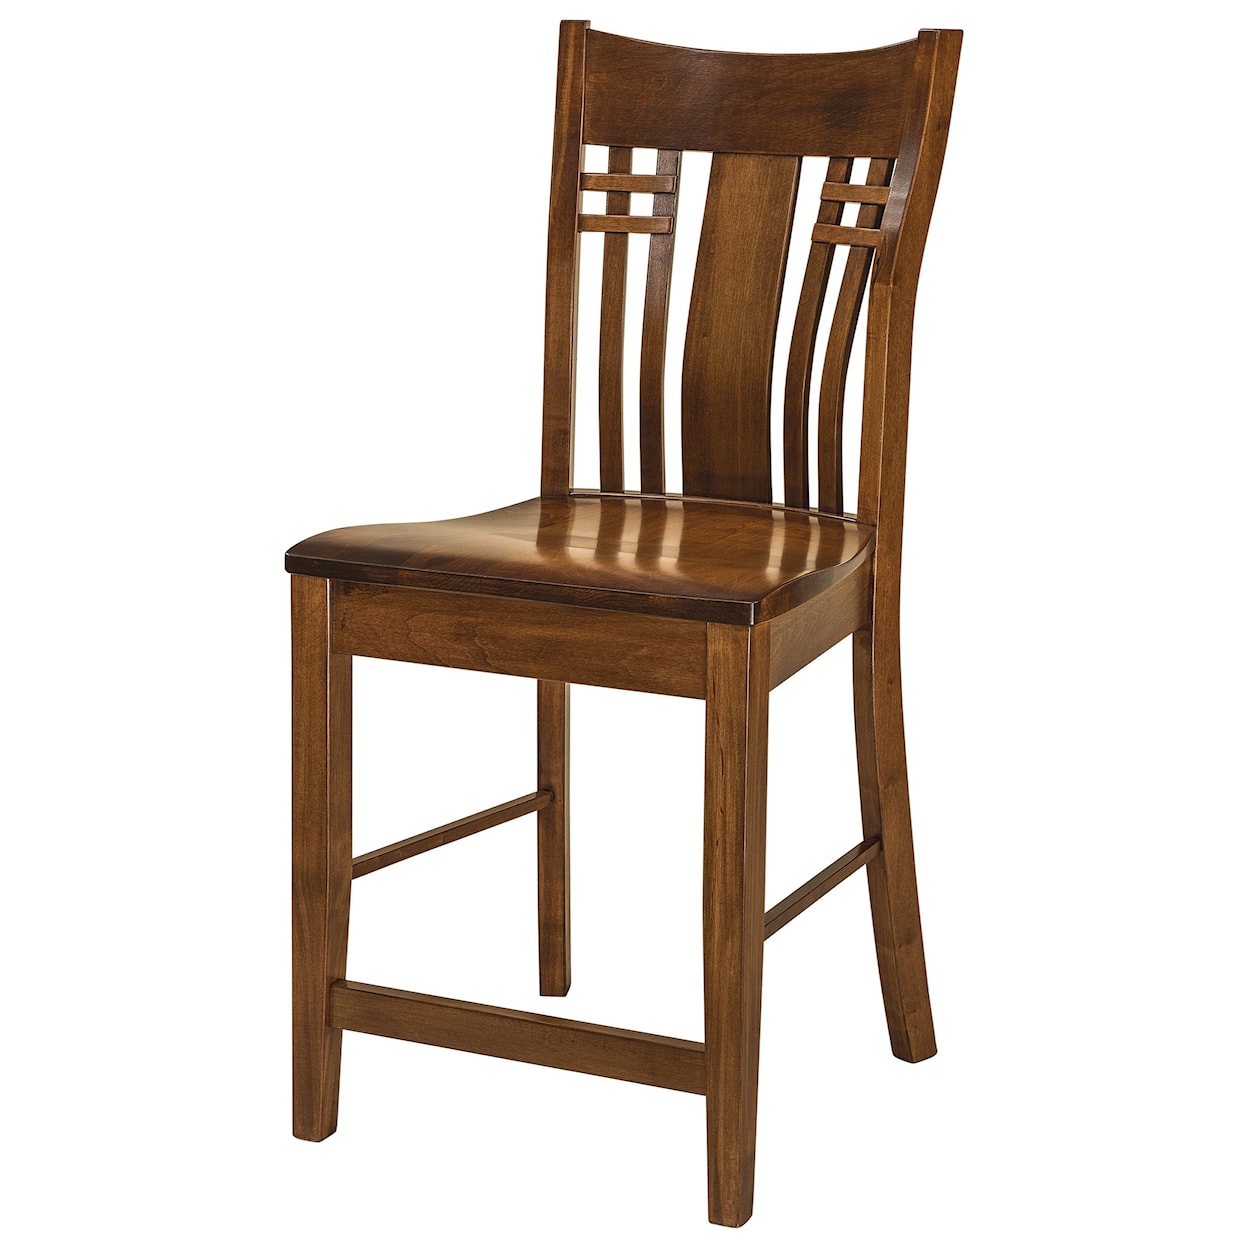 F&N Woodworking Bennet Stationary Bar Stool - Leather Seat